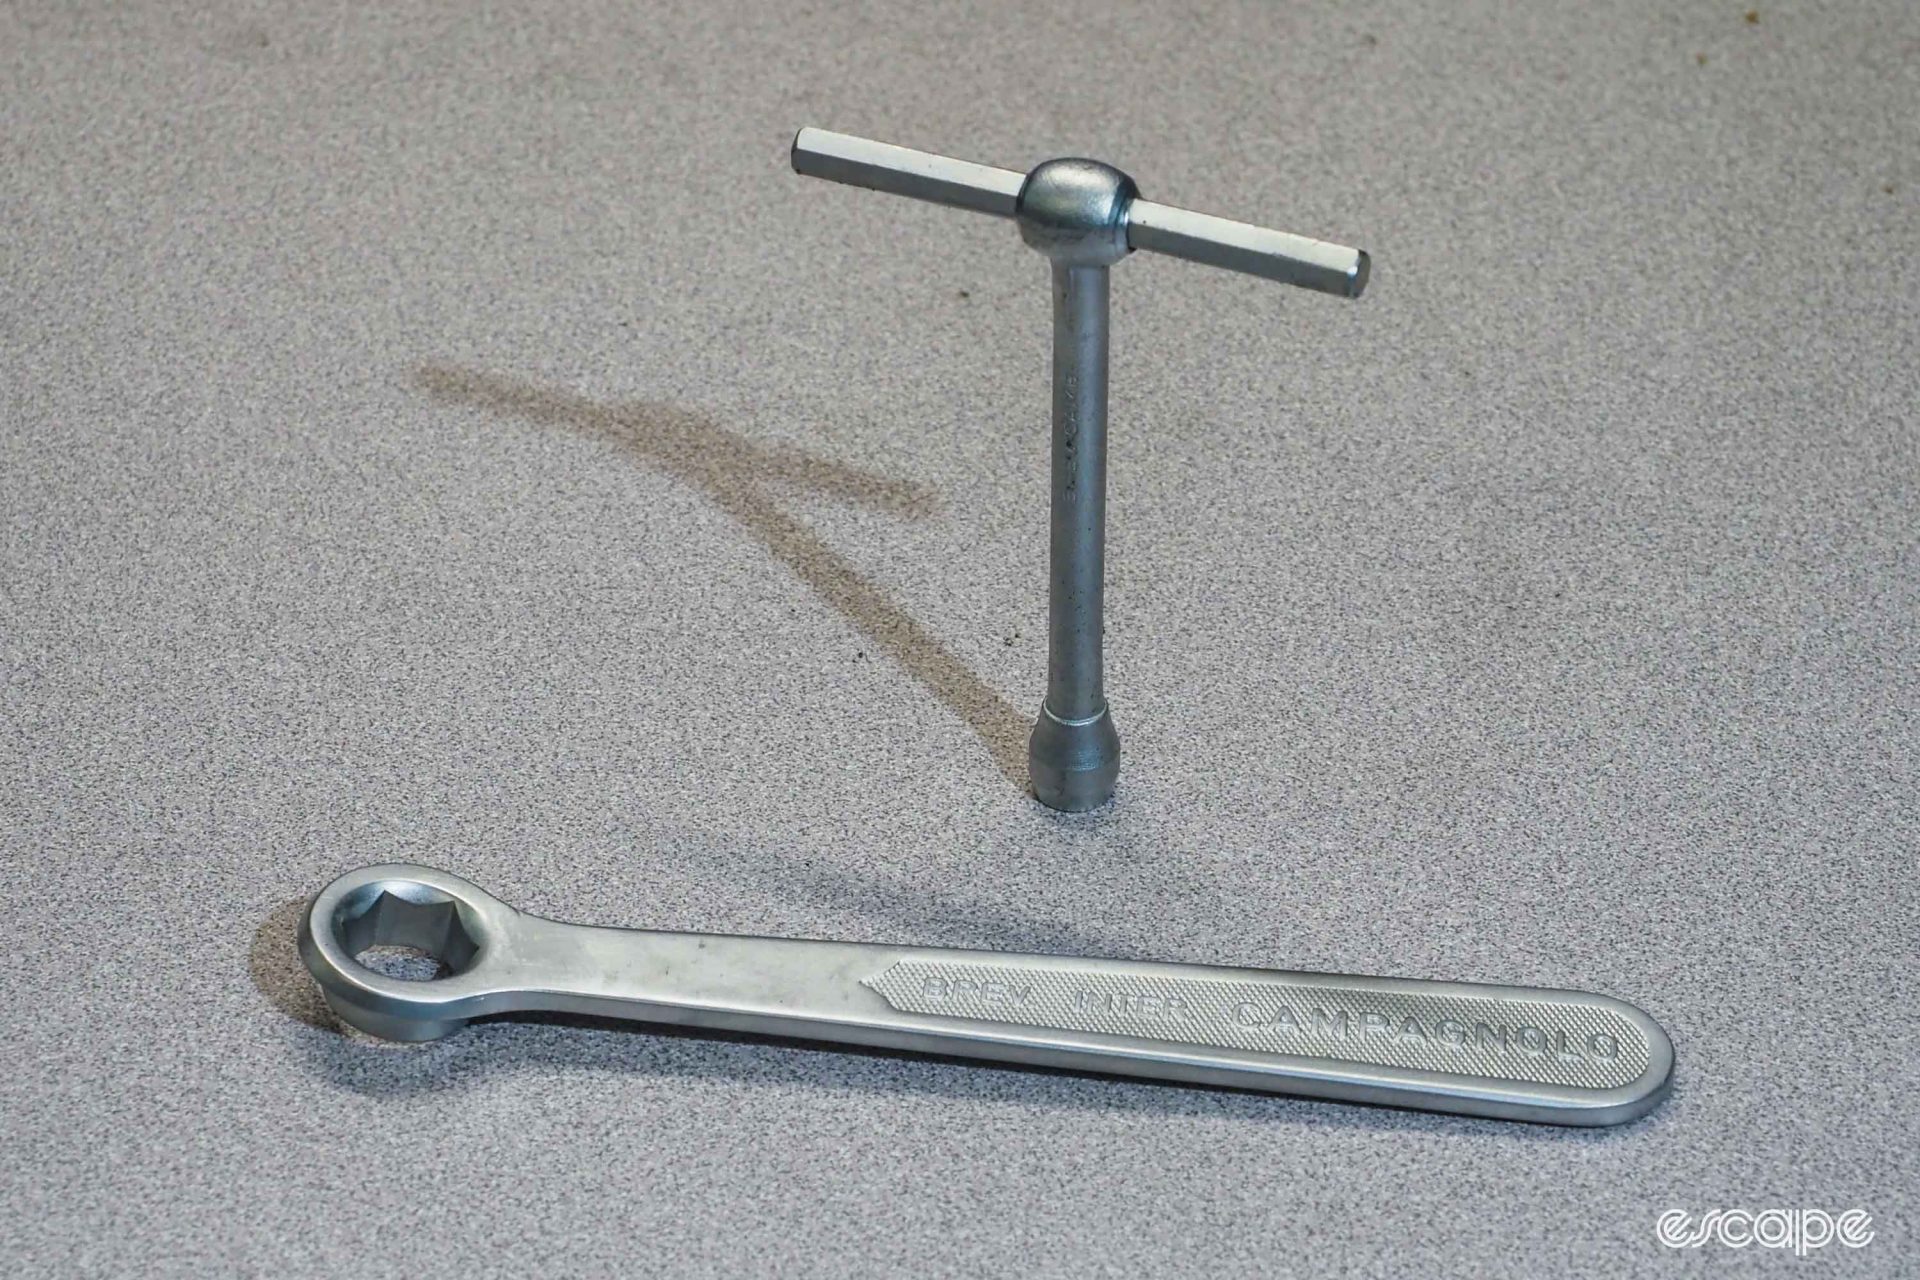 Campagnolo tool kit T-wrench and peanut butter wrench